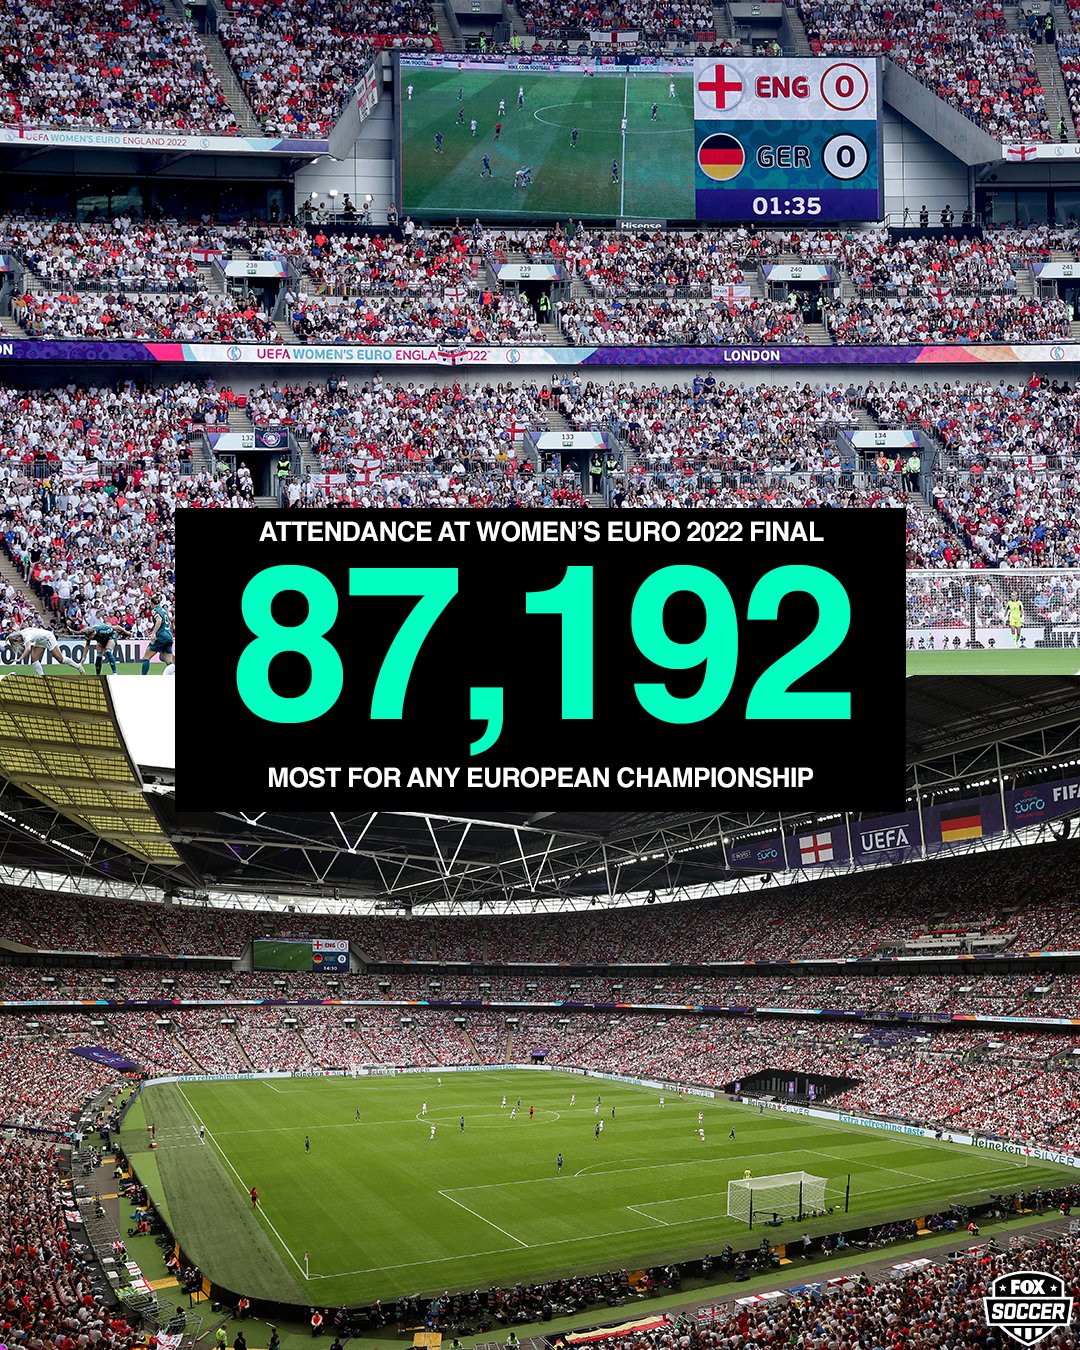 Fox Soccer History 87 192 People Are In Attendance For Today S Women S Euro 22 Final The Biggest Crowd Of Any European Championship Ever T Co Dtjwj2dojg Twitter